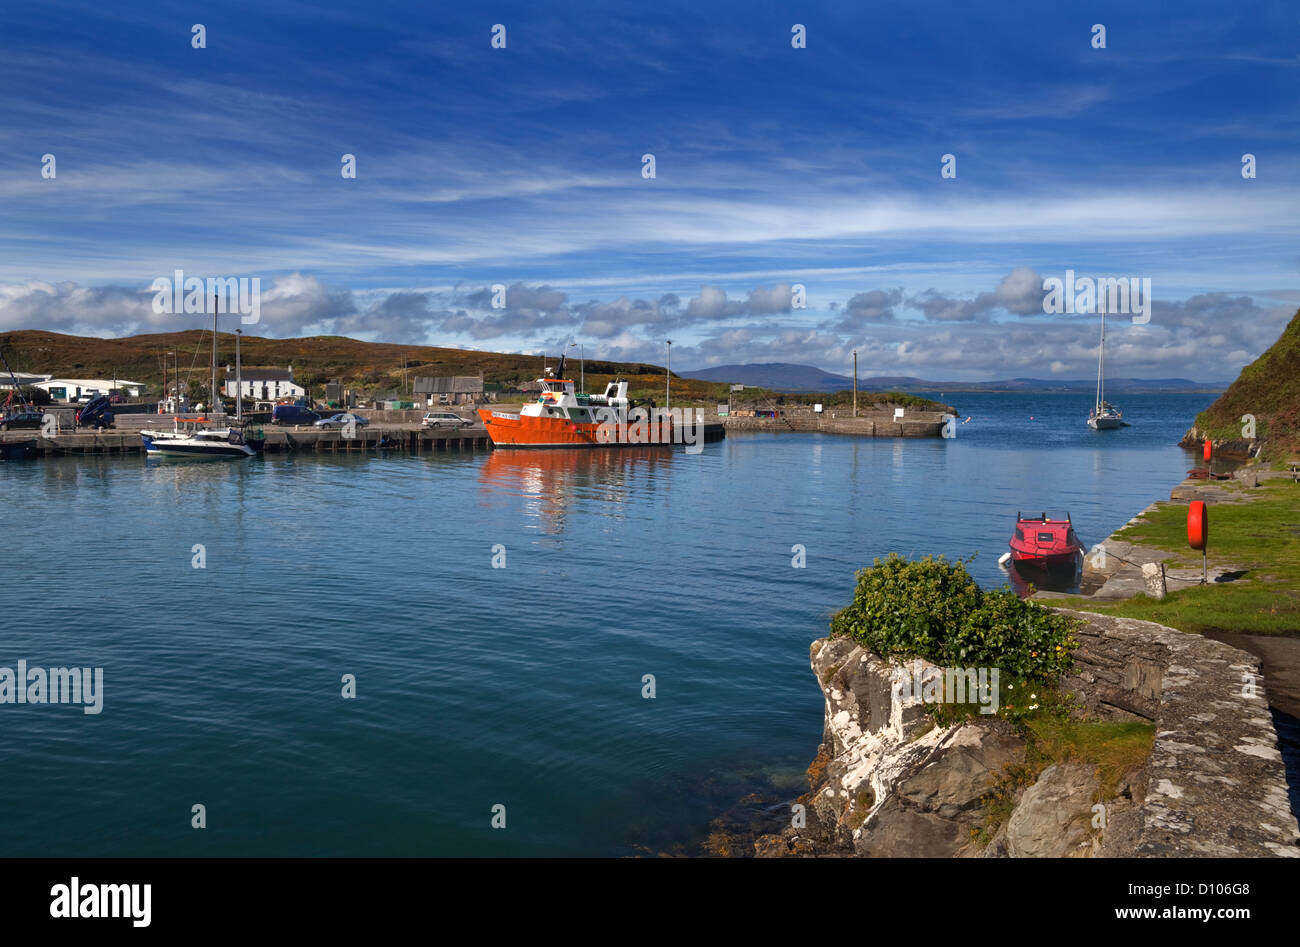 Die North Harbour, Cape Clear Island, County Cork, Irland. Stockfoto